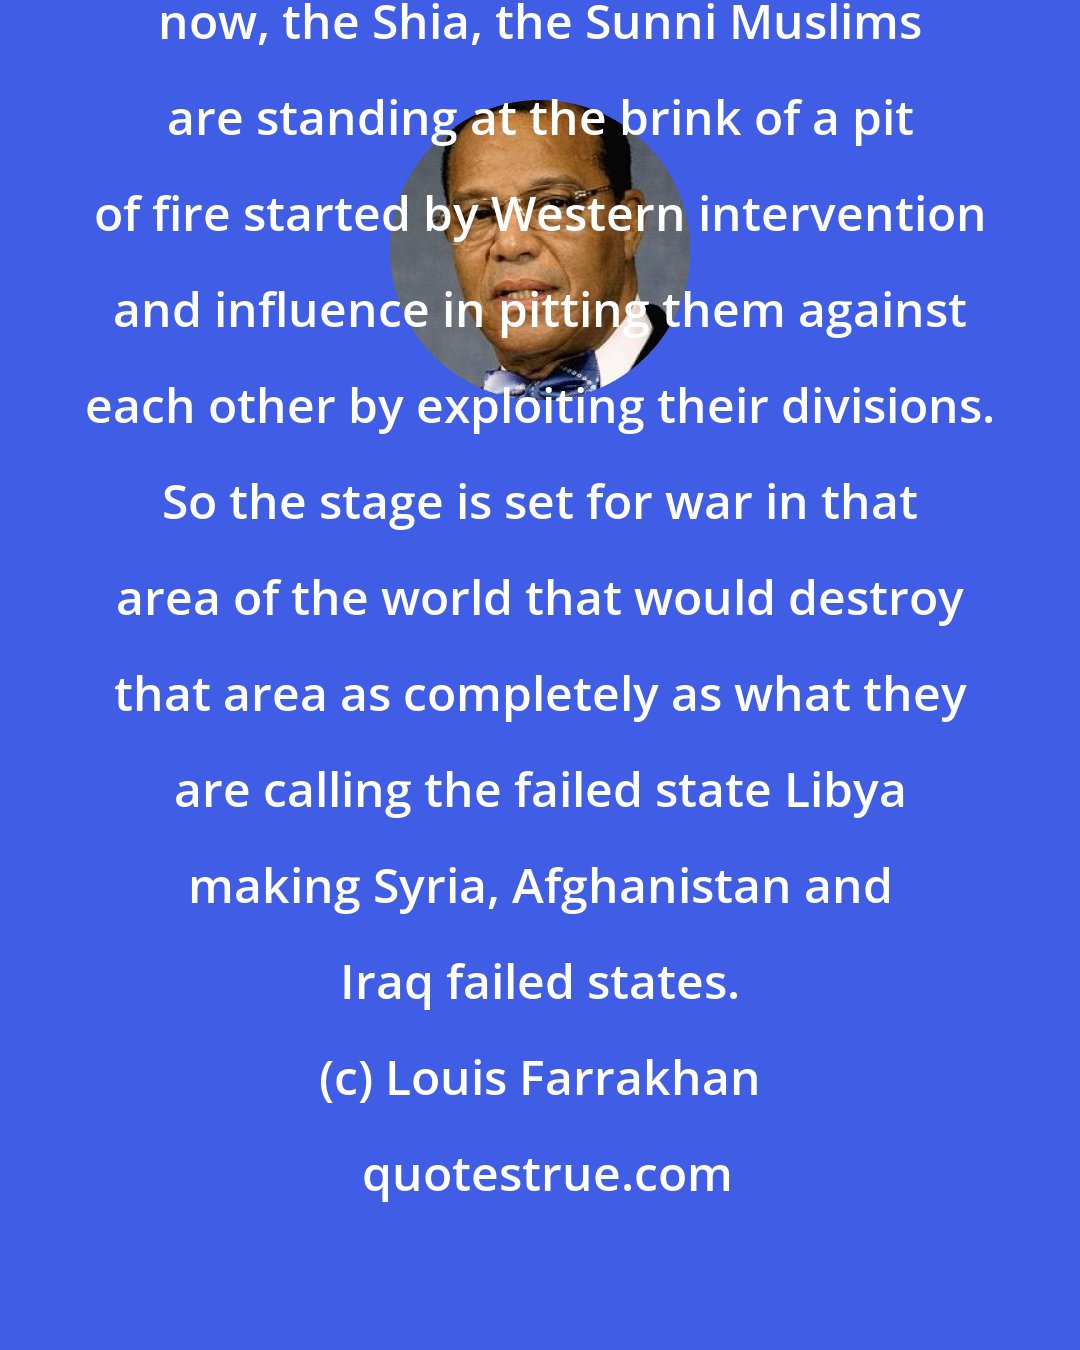 Louis Farrakhan: If you look in the Muslim World right now, the Shia, the Sunni Muslims are standing at the brink of a pit of fire started by Western intervention and influence in pitting them against each other by exploiting their divisions. So the stage is set for war in that area of the world that would destroy that area as completely as what they are calling the failed state Libya making Syria, Afghanistan and Iraq failed states.